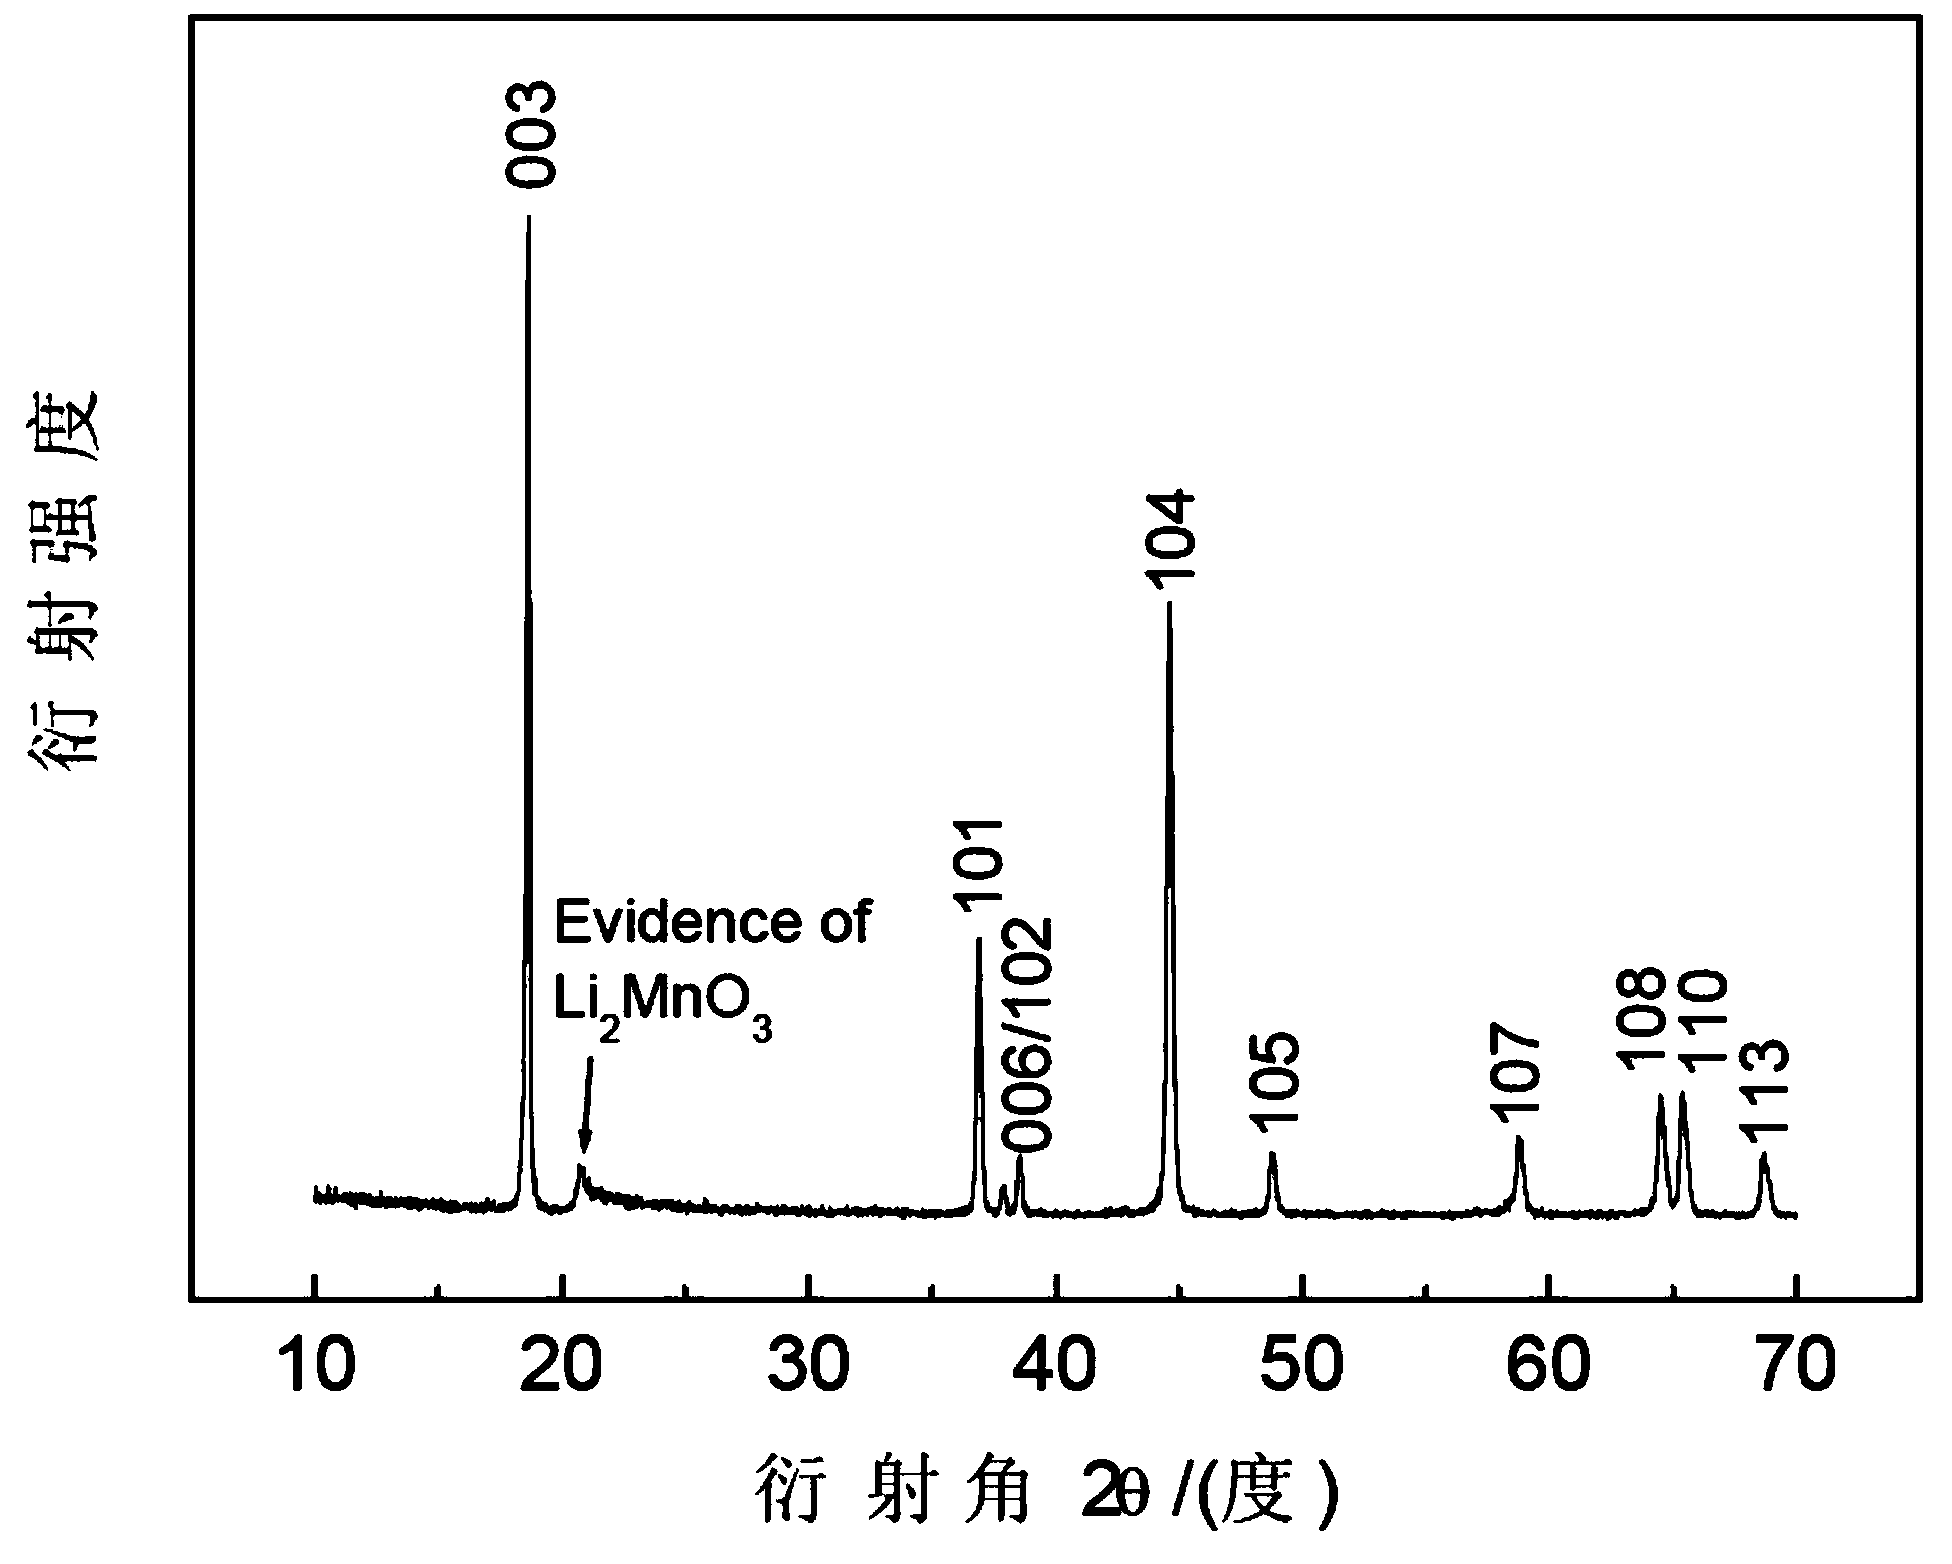 Method for preparing lithium-rich manganese-based layered lithium battery cathode material based on efficient solid-phase chemical complexation reaction